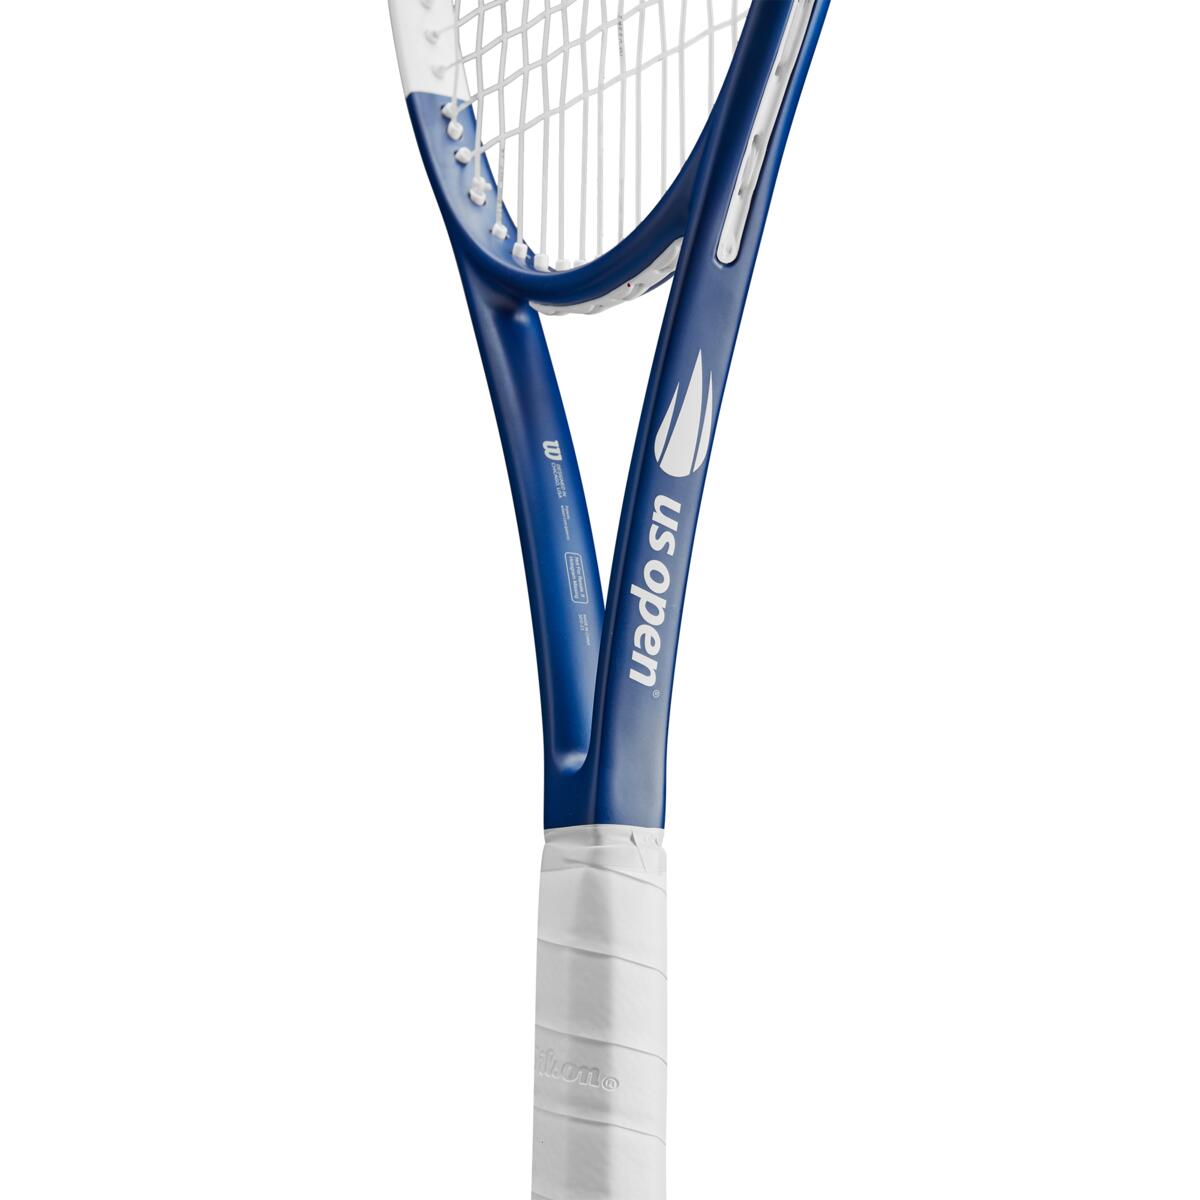 Wilson US Open Blade 98 v8 16x19 - Limited Edition